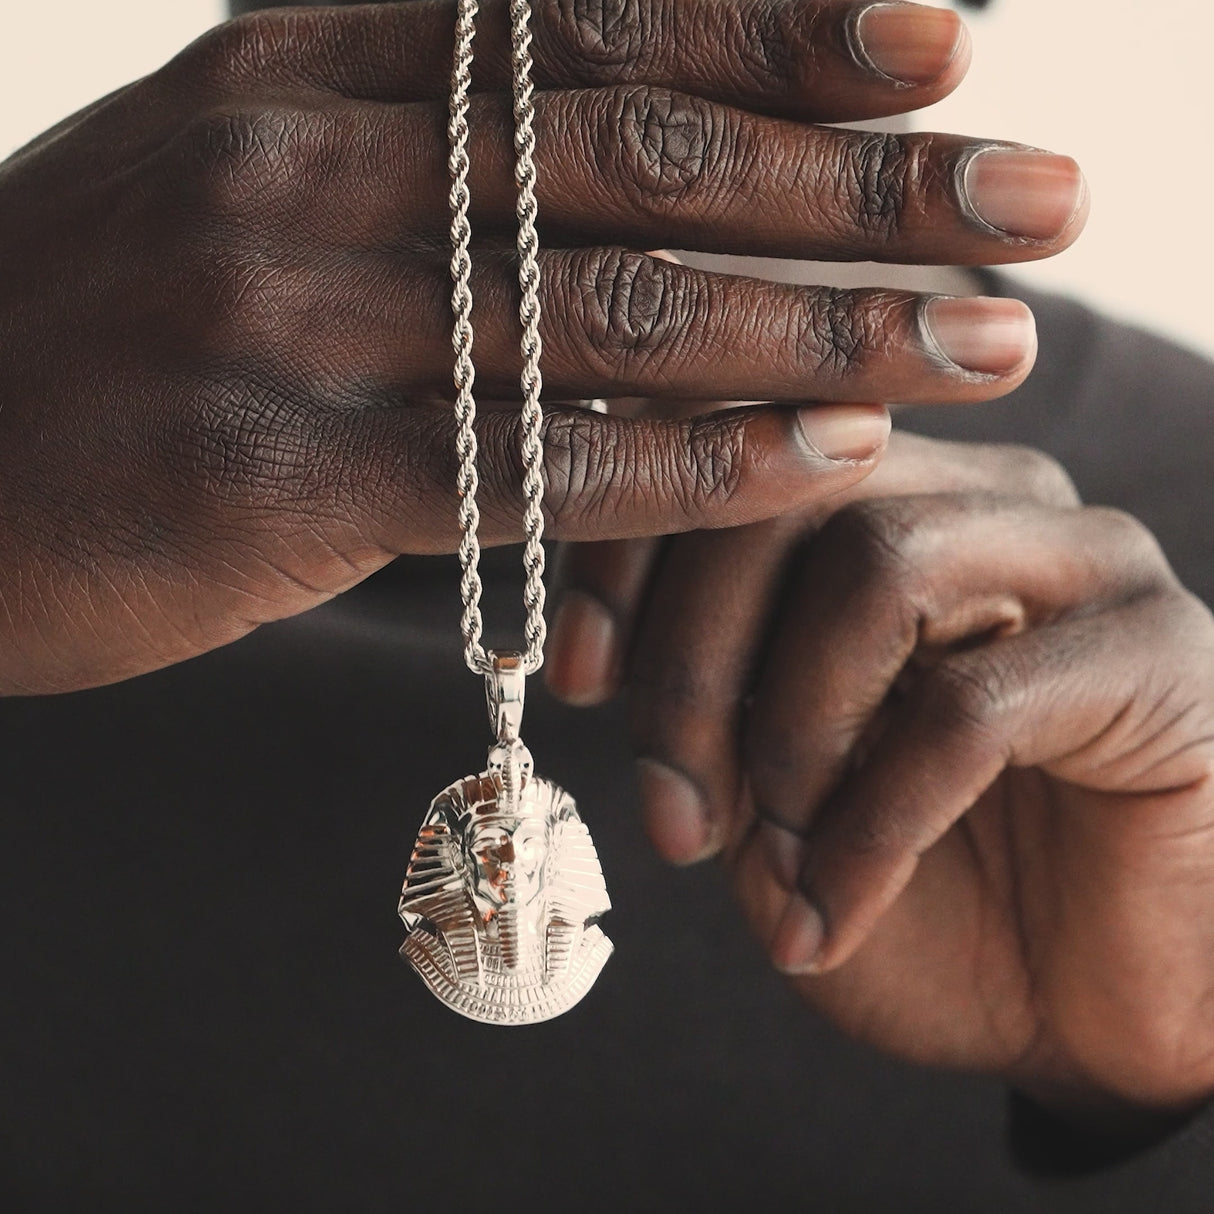 Pharaoh Head V2 Necklace Pendant & Rope Chain The Gold Gods Men's Jewelry Video White Gold